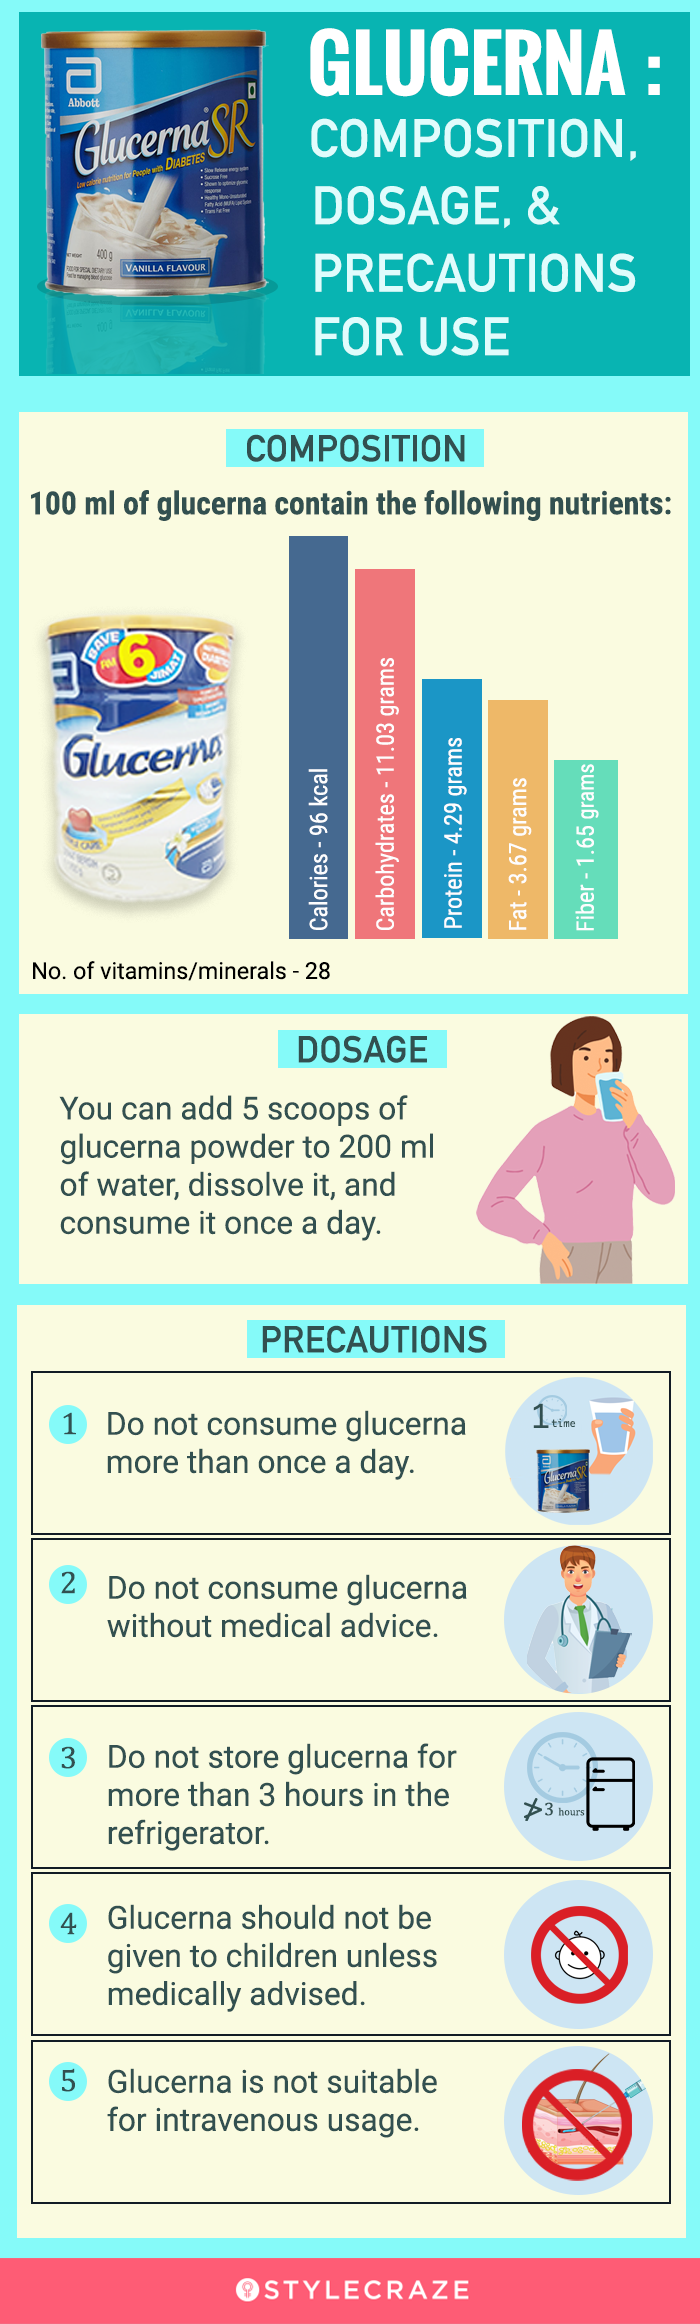 composition, dosage, and precautions for usage of glucerna [infographic]